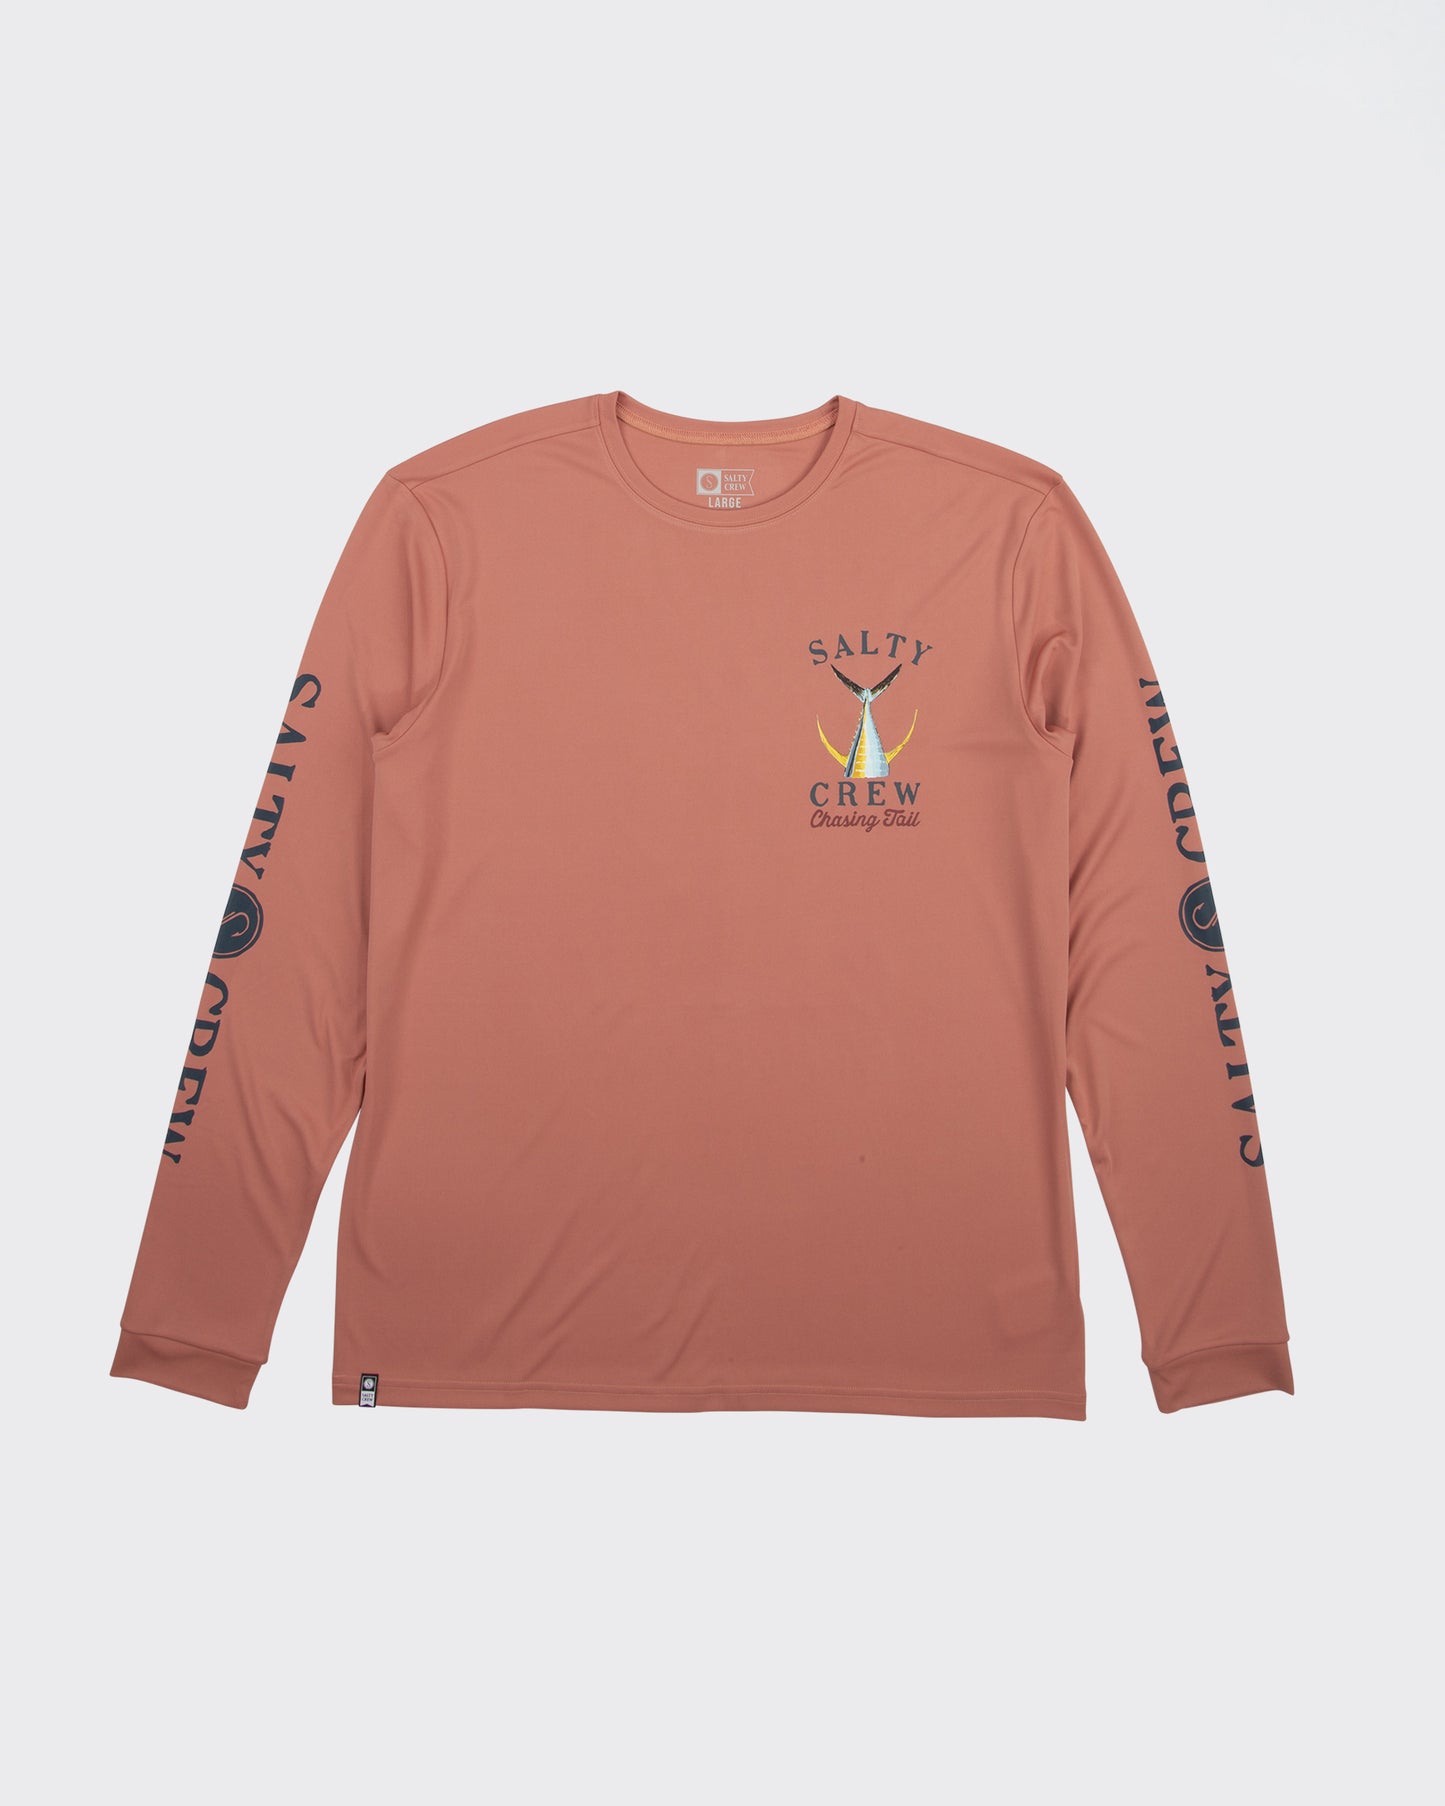 Tailed Coral L/S Sunshirt